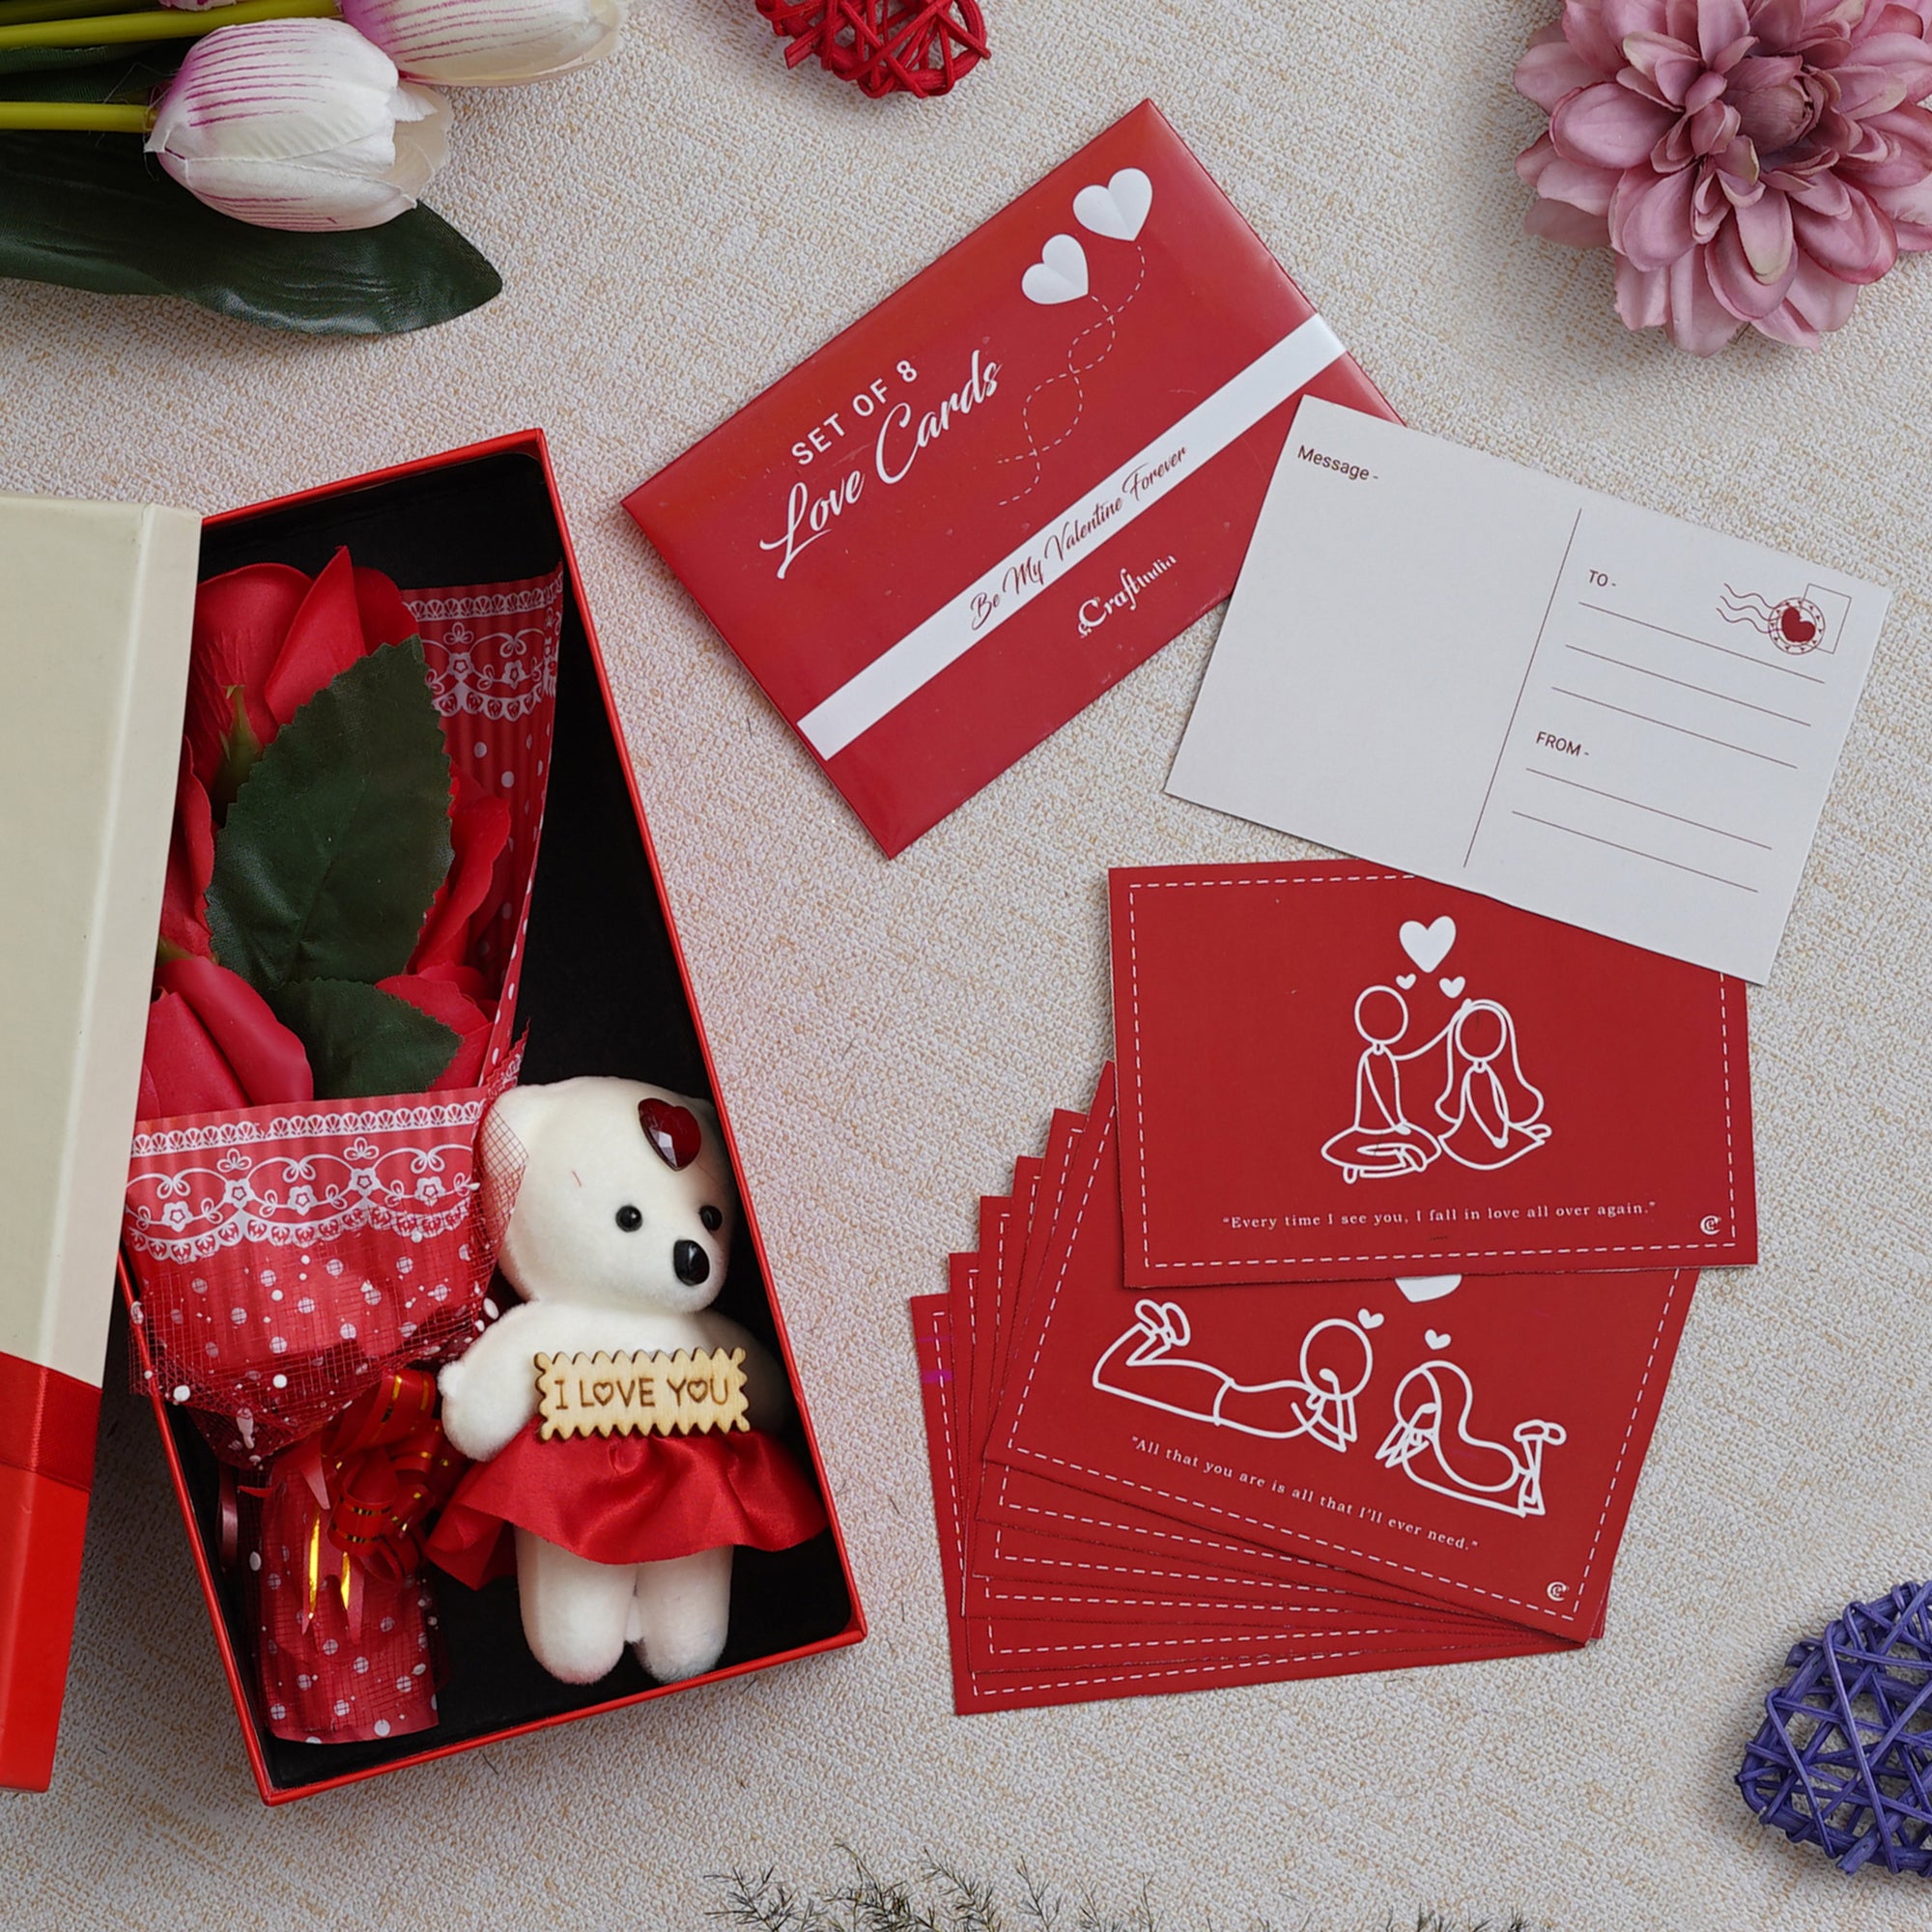 Valentine Combo of Set of 8 Love Post Cards Gift Cards Set, Red Roses Bouquet and White, Red Teddy Bear Valentine's Rectangle Shaped Gift Box